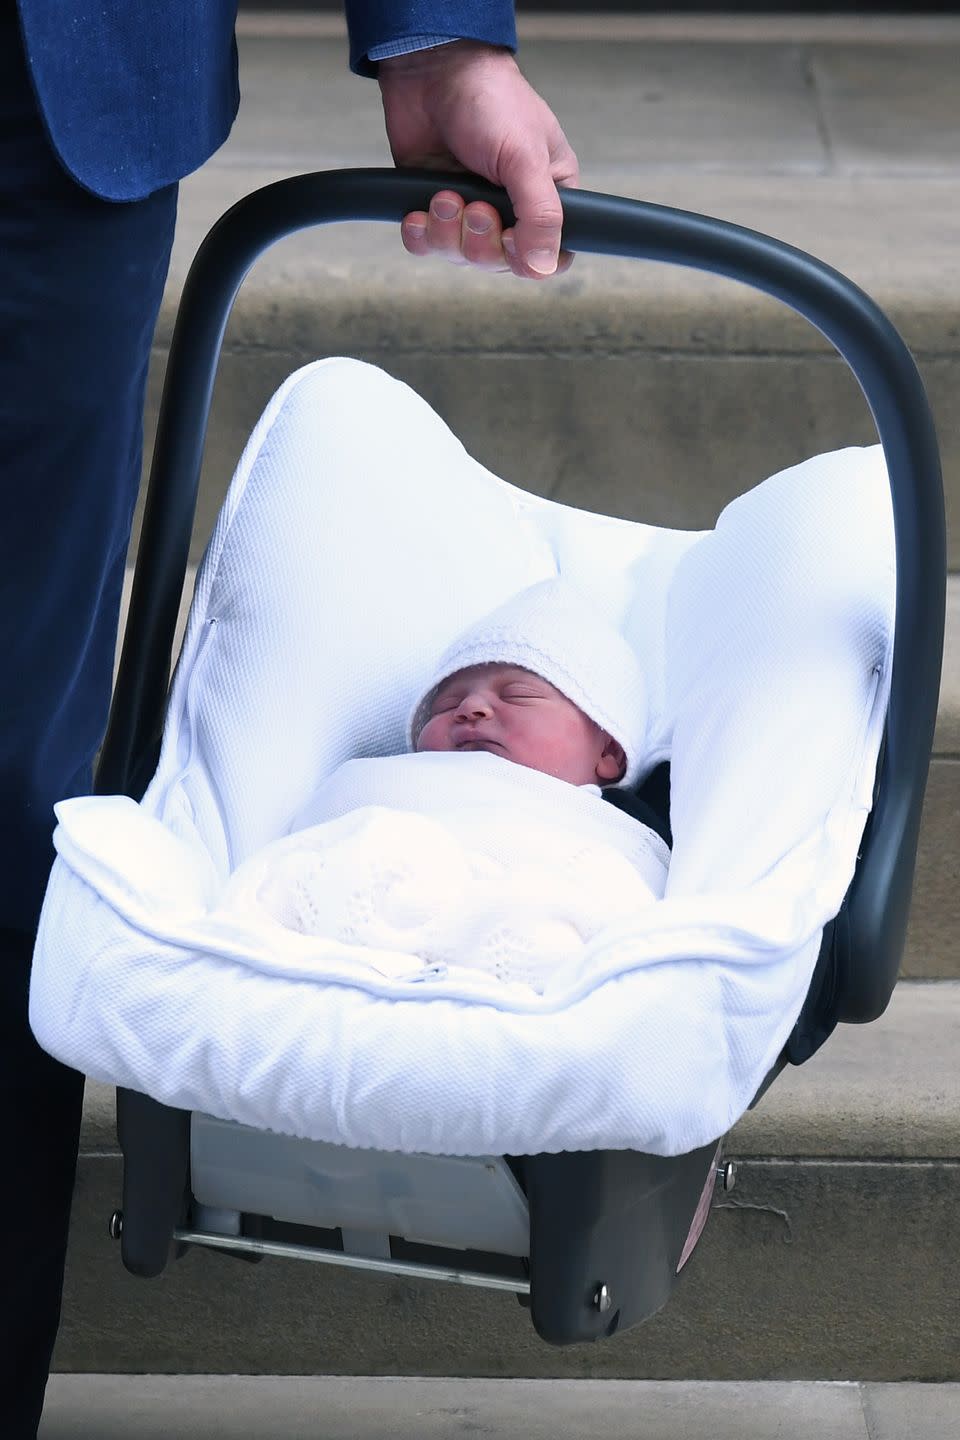 See the First Photos of the New Royal Baby!